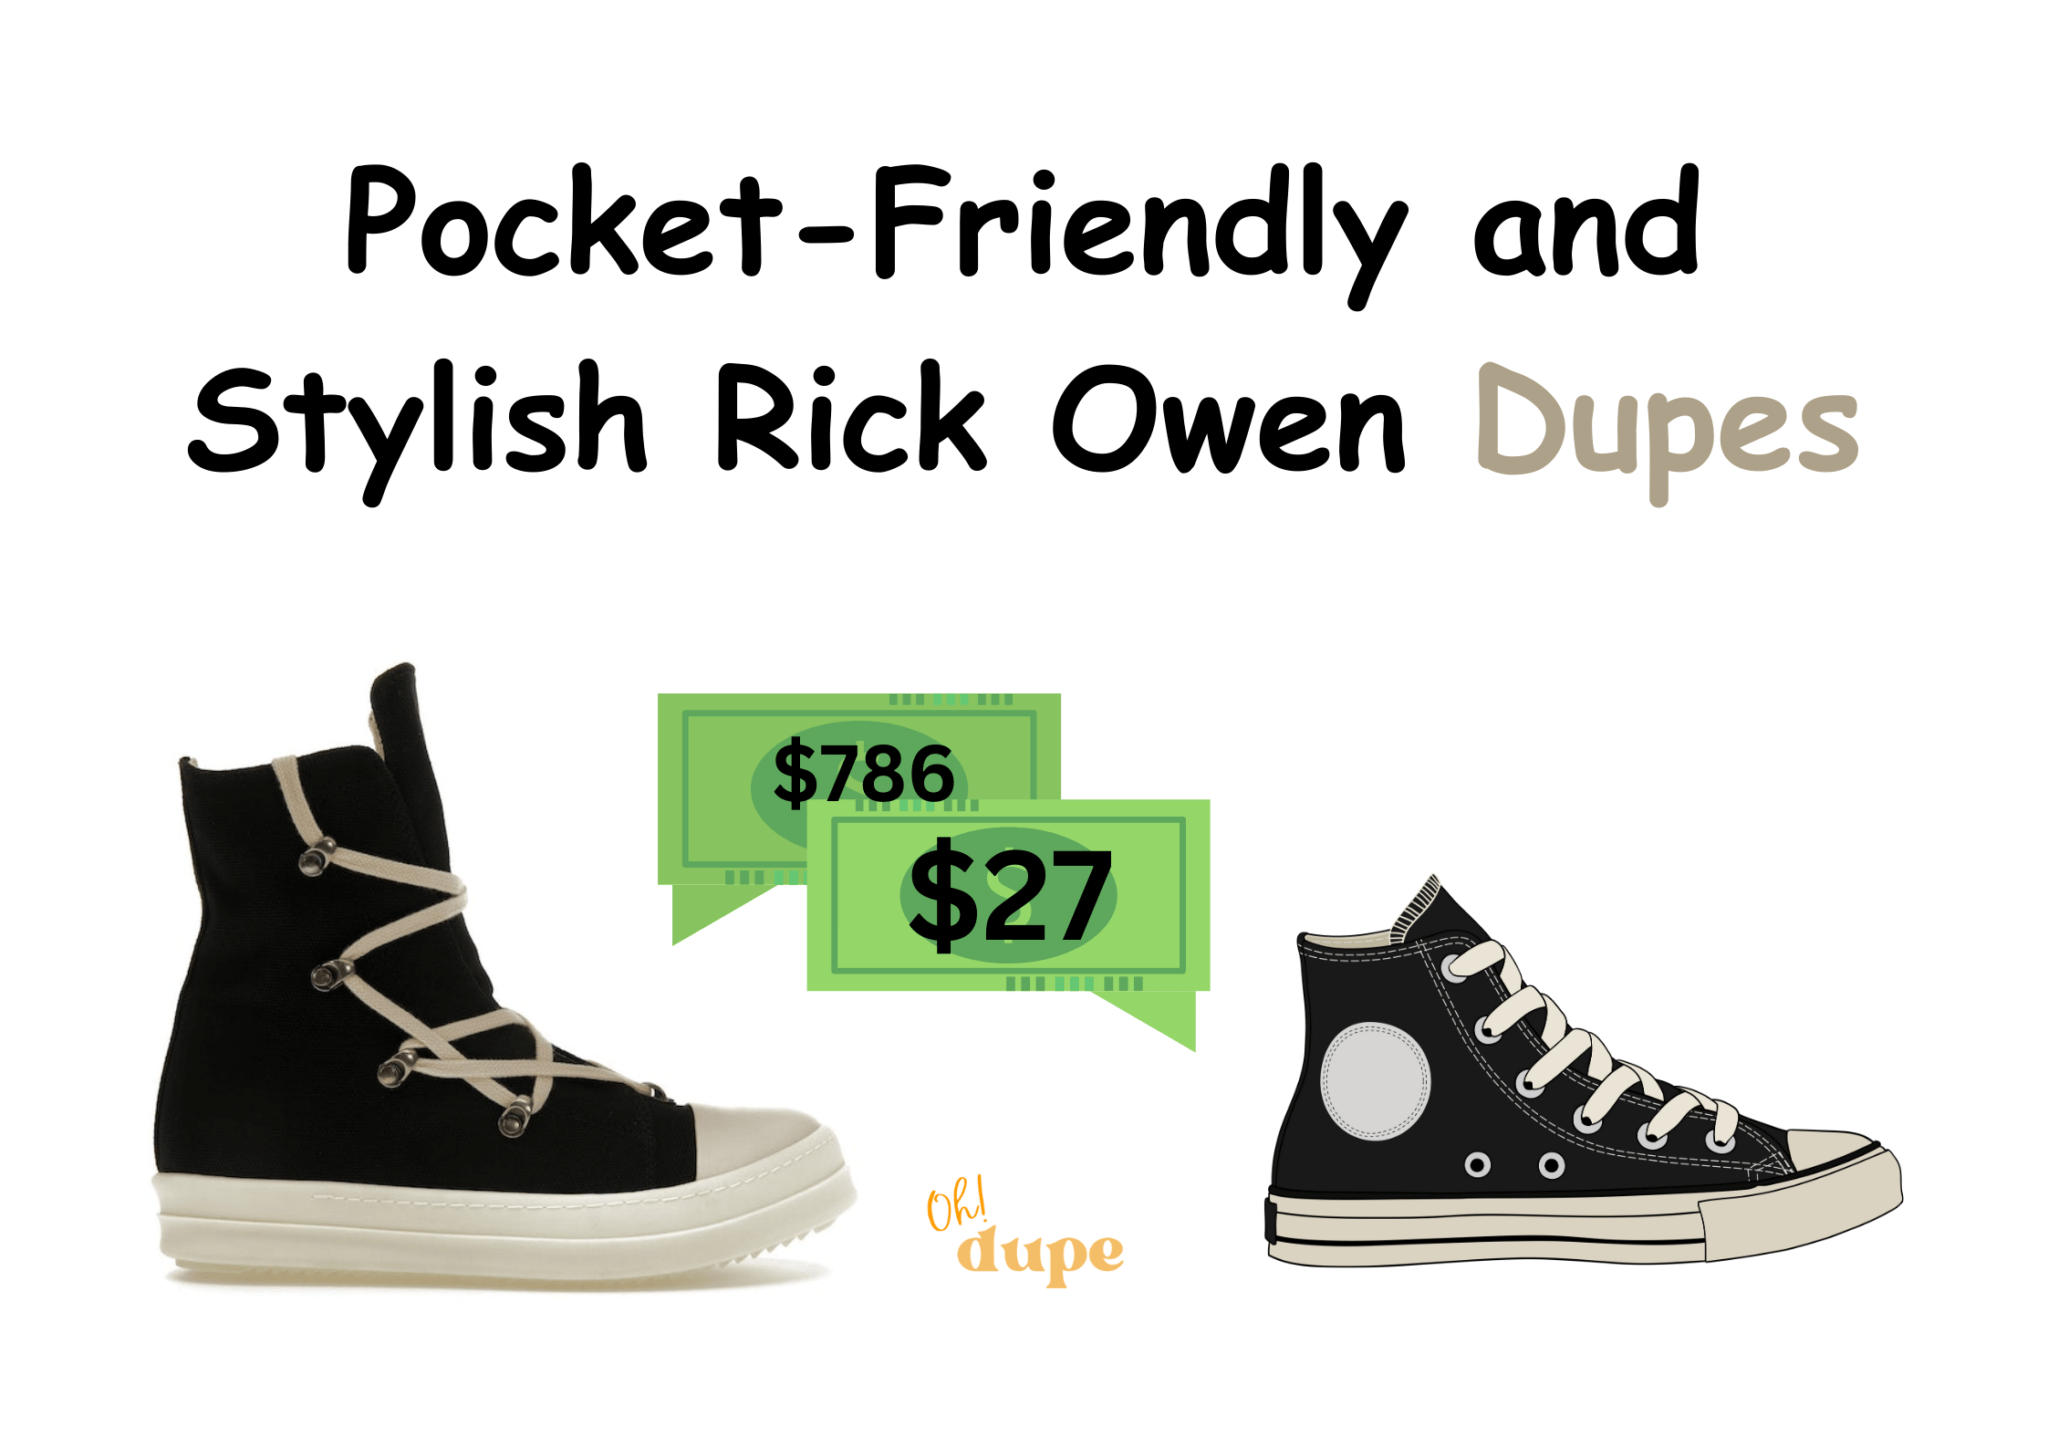 Top 11 Pocket-Friendly and Stylish Rick Owen Dupes - ohdupe.com